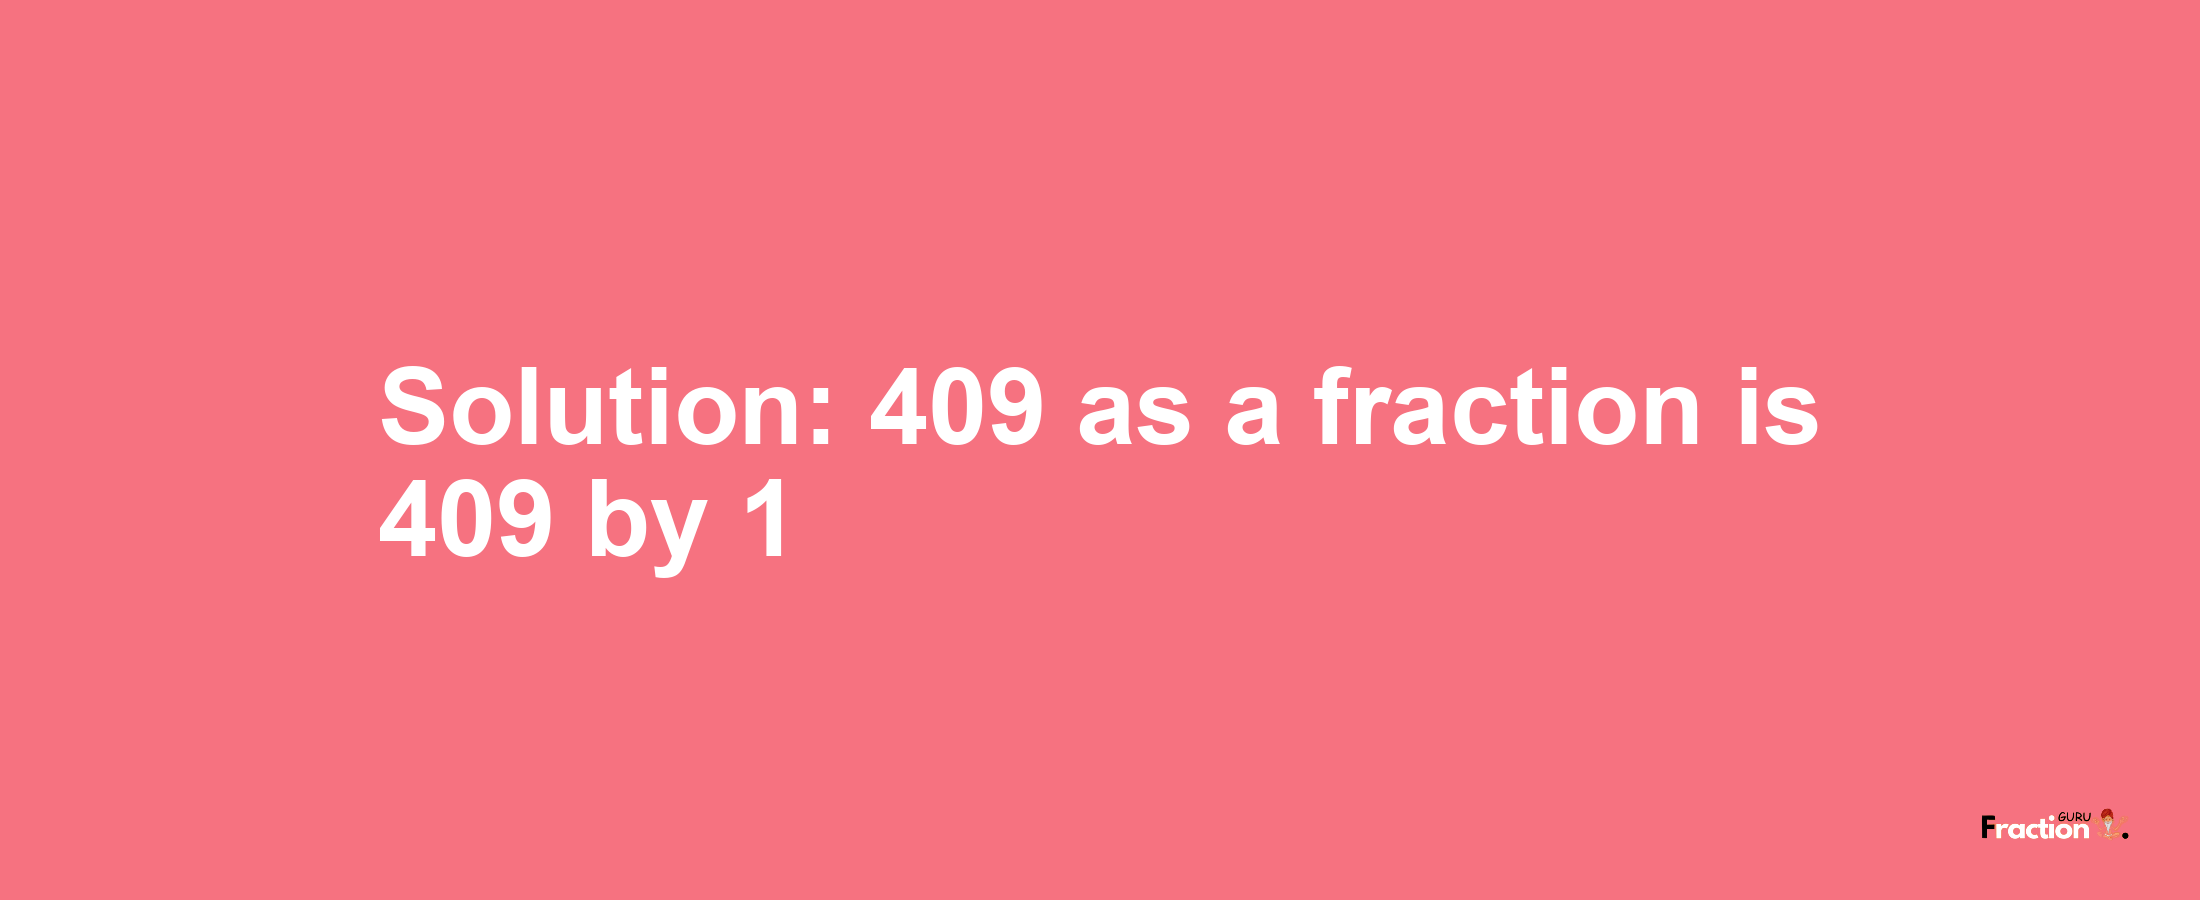 Solution:409 as a fraction is 409/1